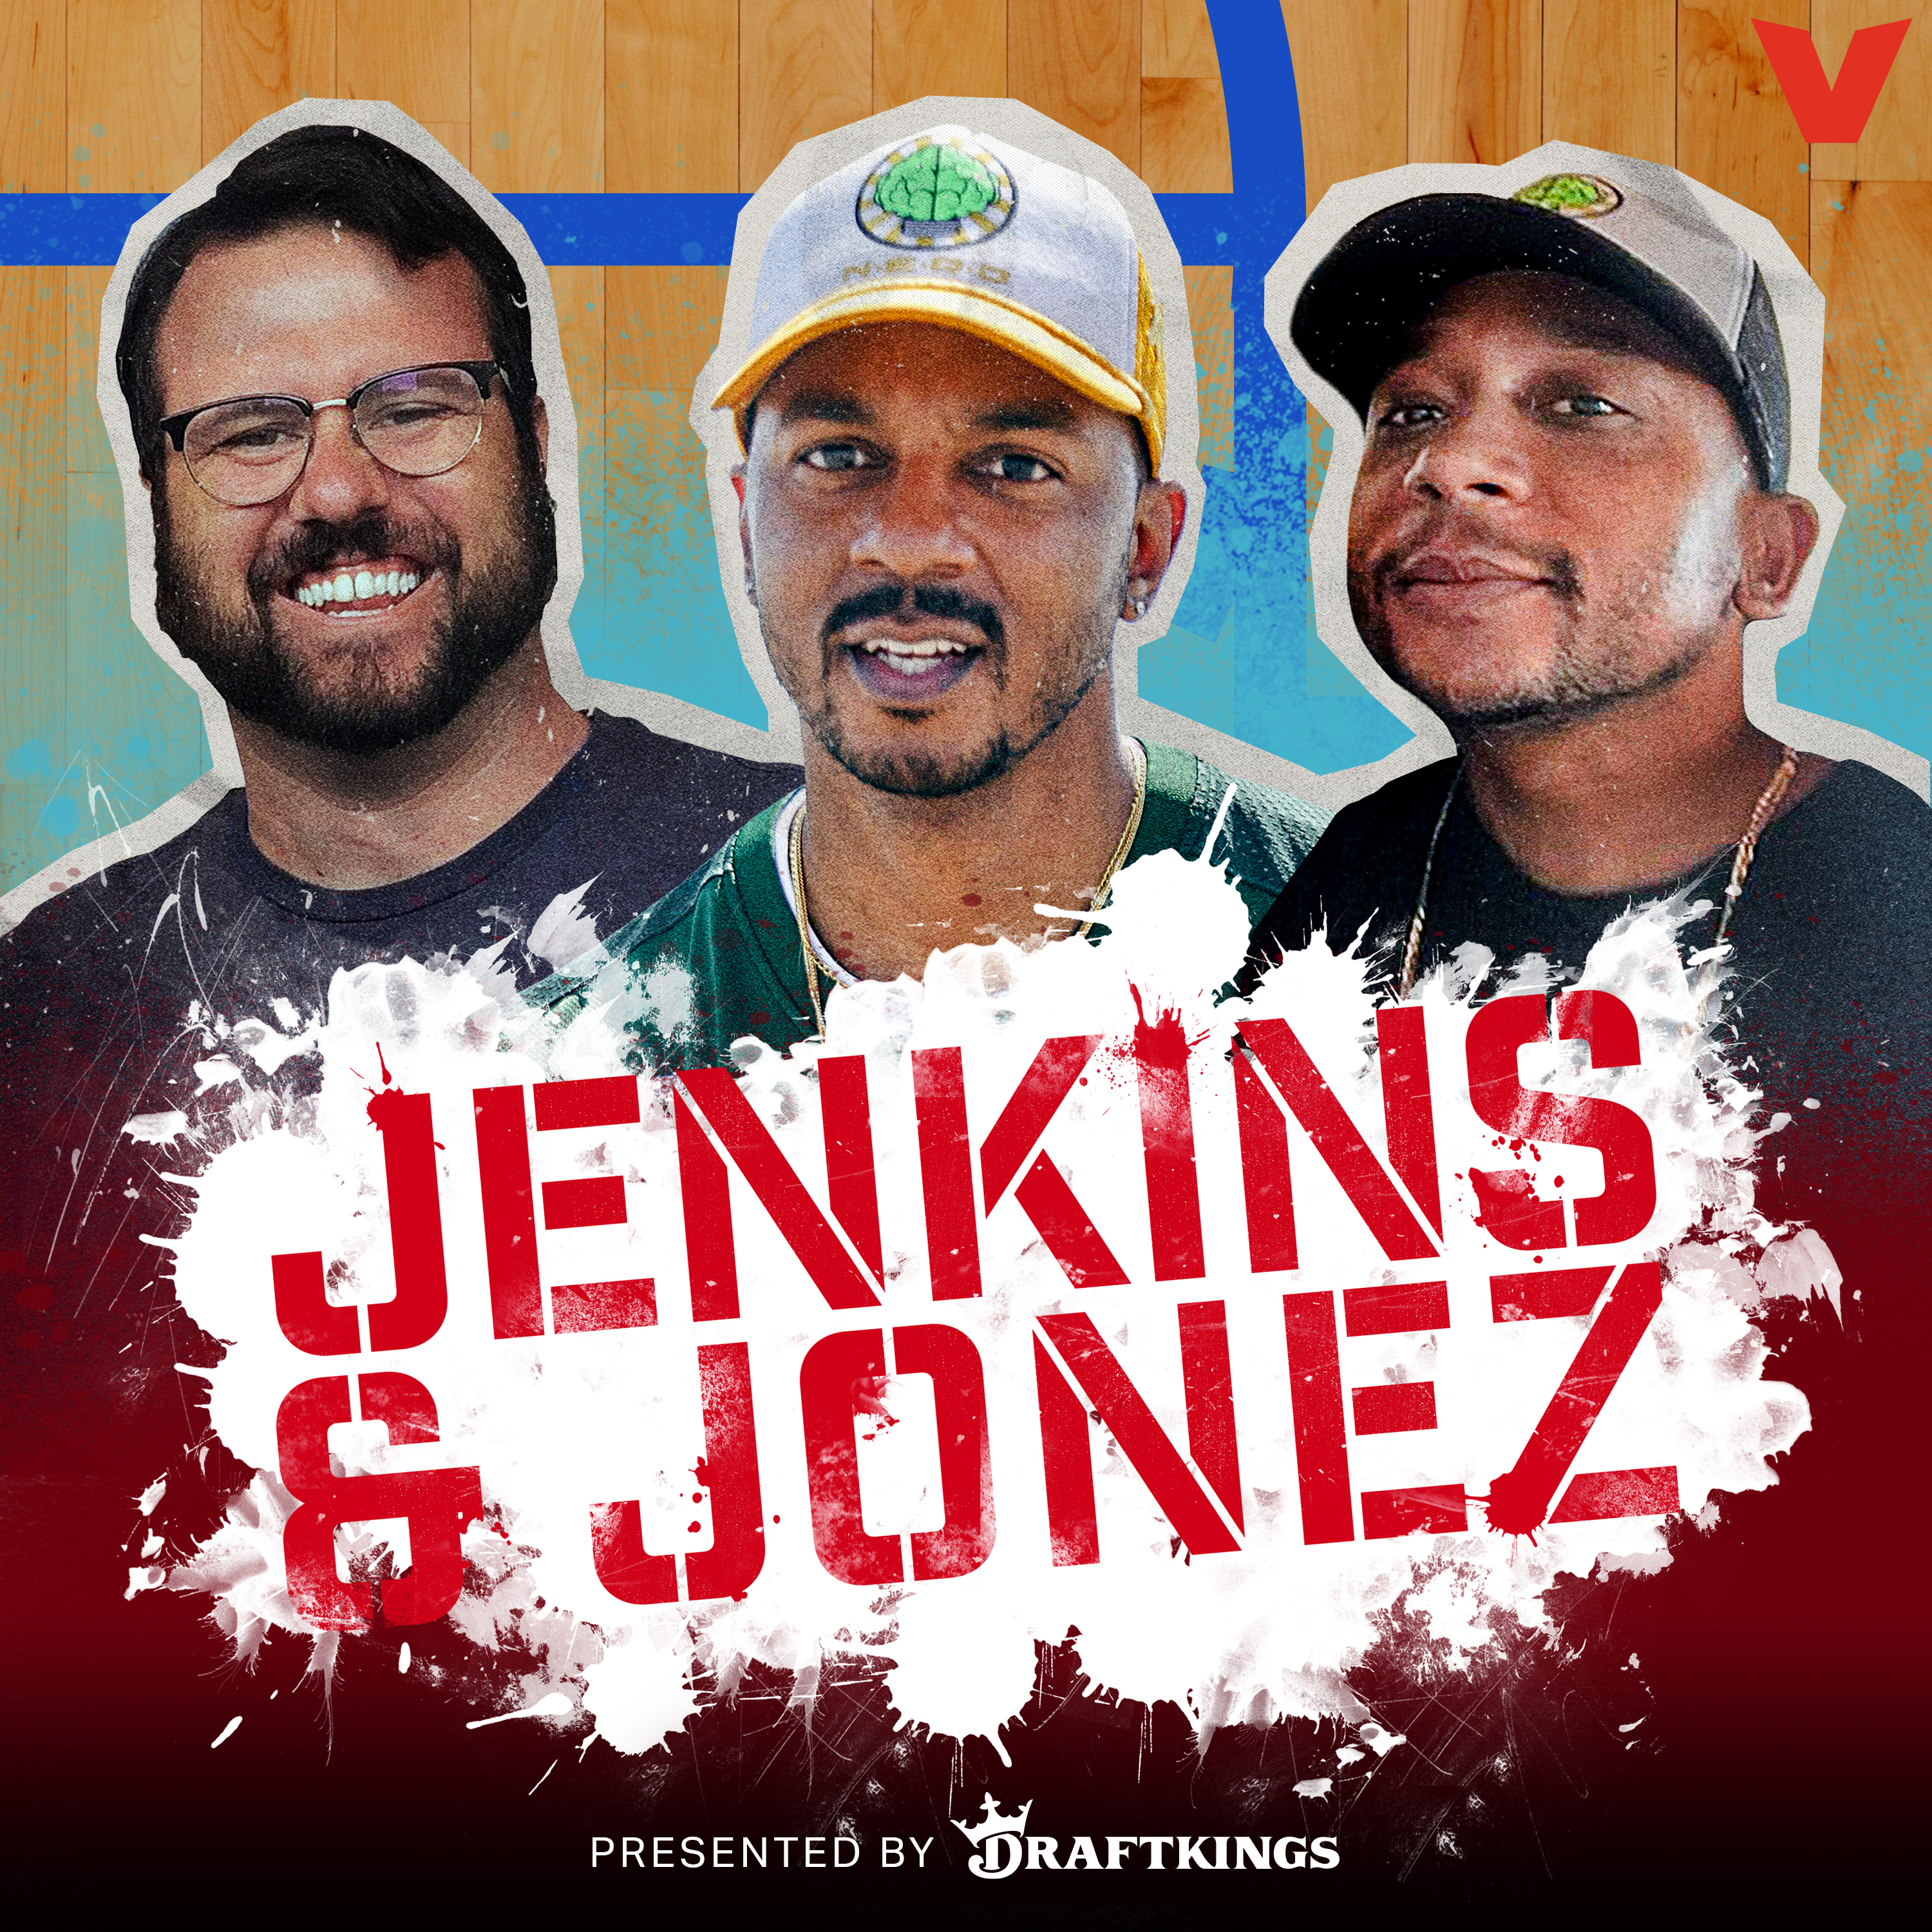 Jenkins and Jonez - KevOnStage Is A Different Type Of Social Media Star